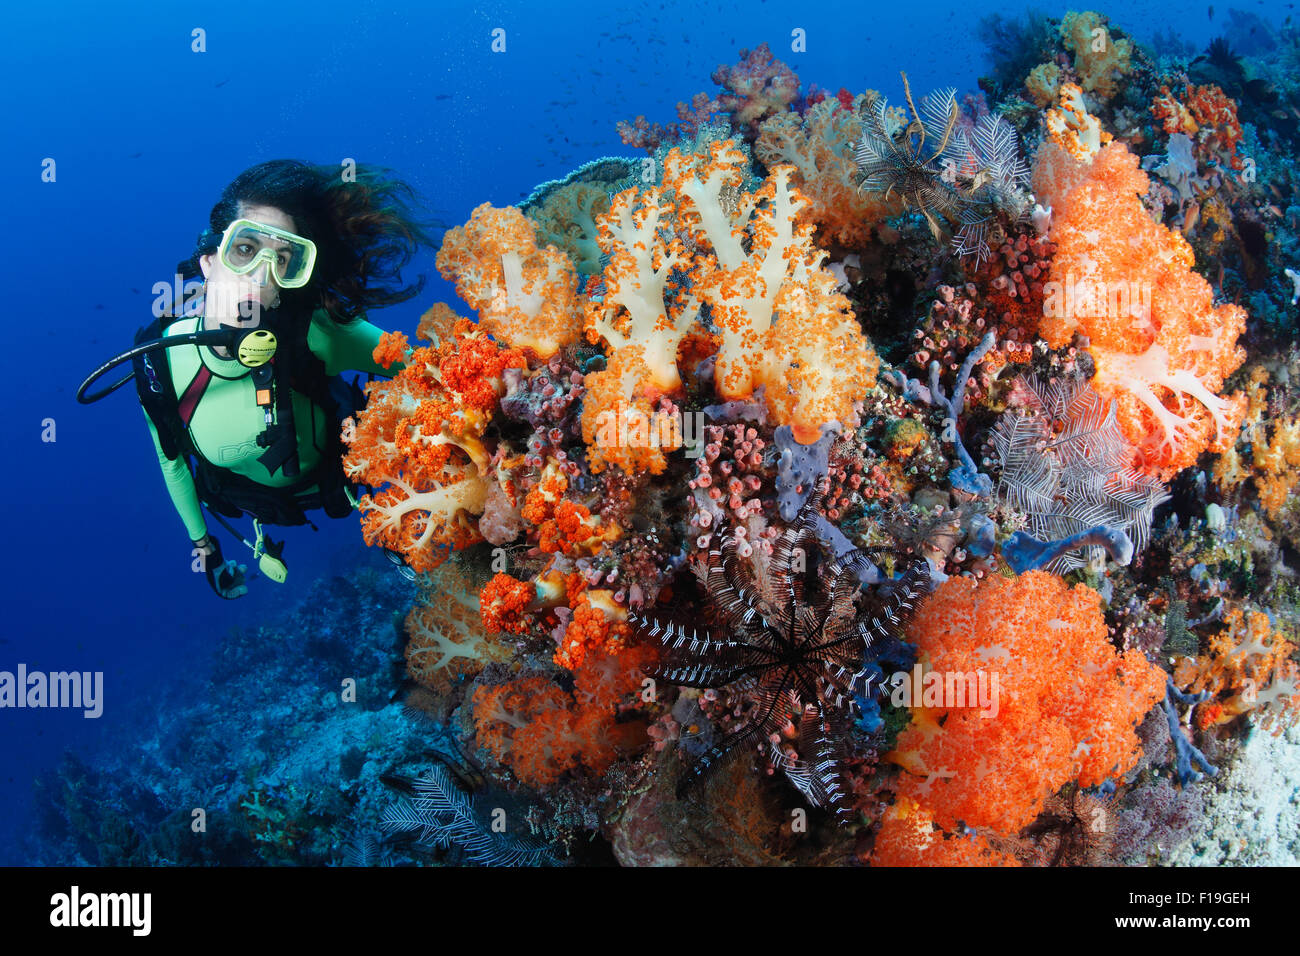 px0203-D. scuba diver (model released) admires soft corals (Dendronephthya sp.) which thrive along current-swept reefs. Indonesi Stock Photo